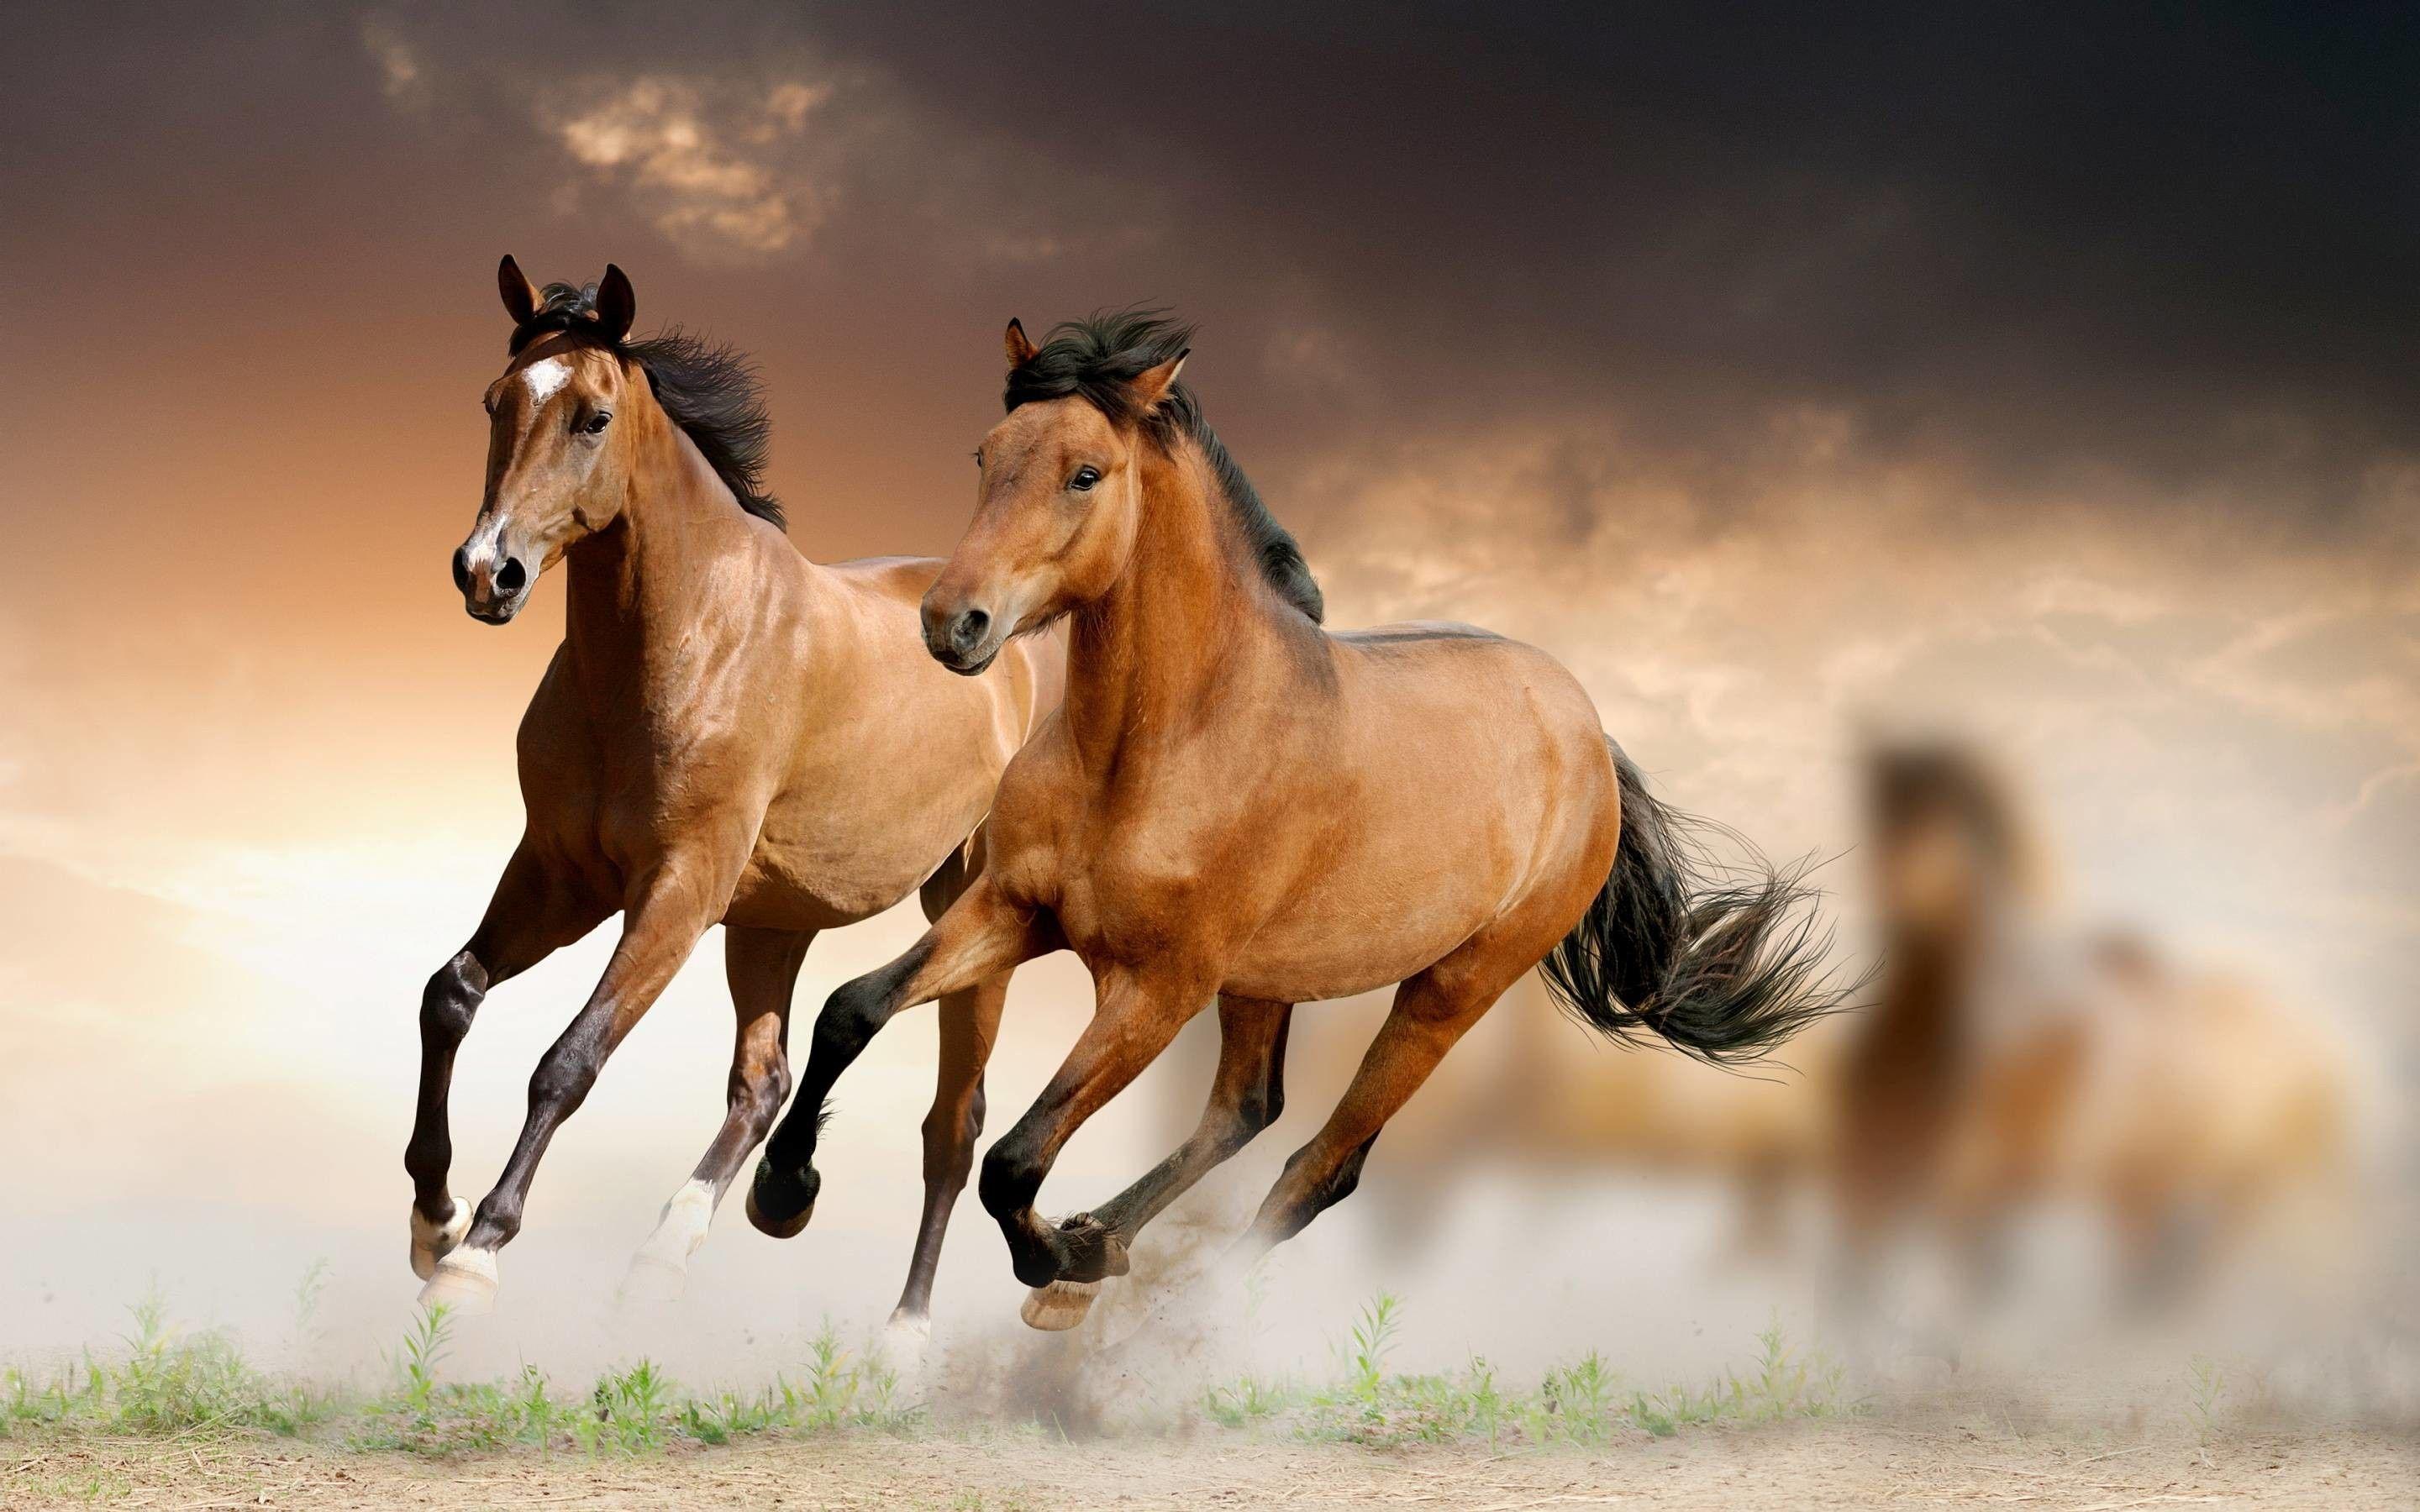 7 Running Horses wallpaper for wall  Myindianthings